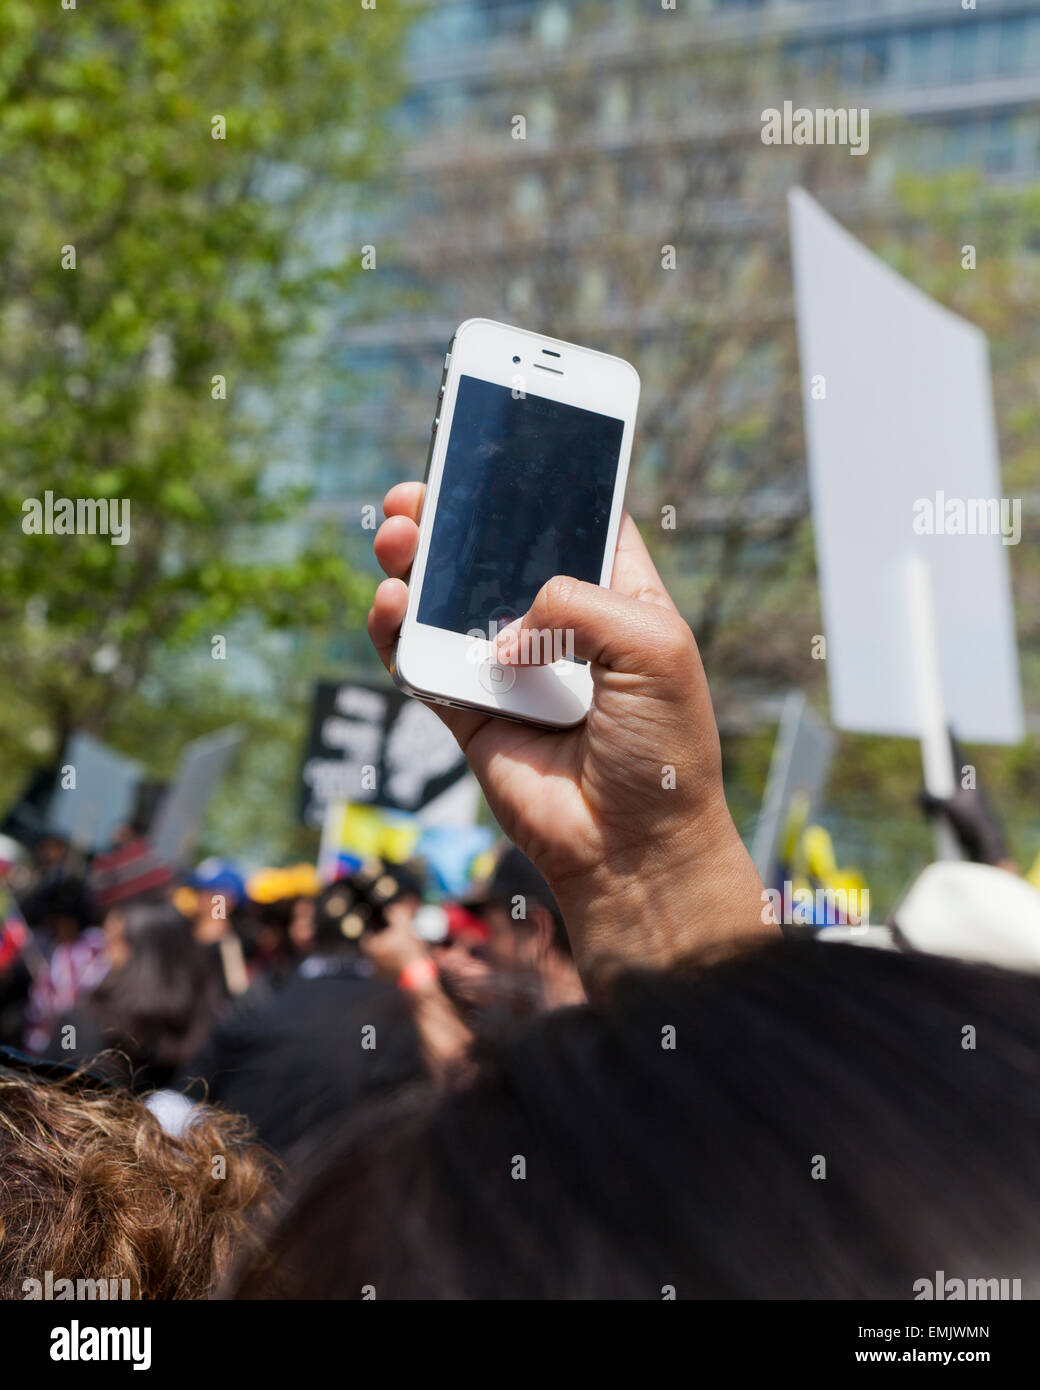 Man taking photo with iPhone above a crowd at a protest rally - USA Stock Photo